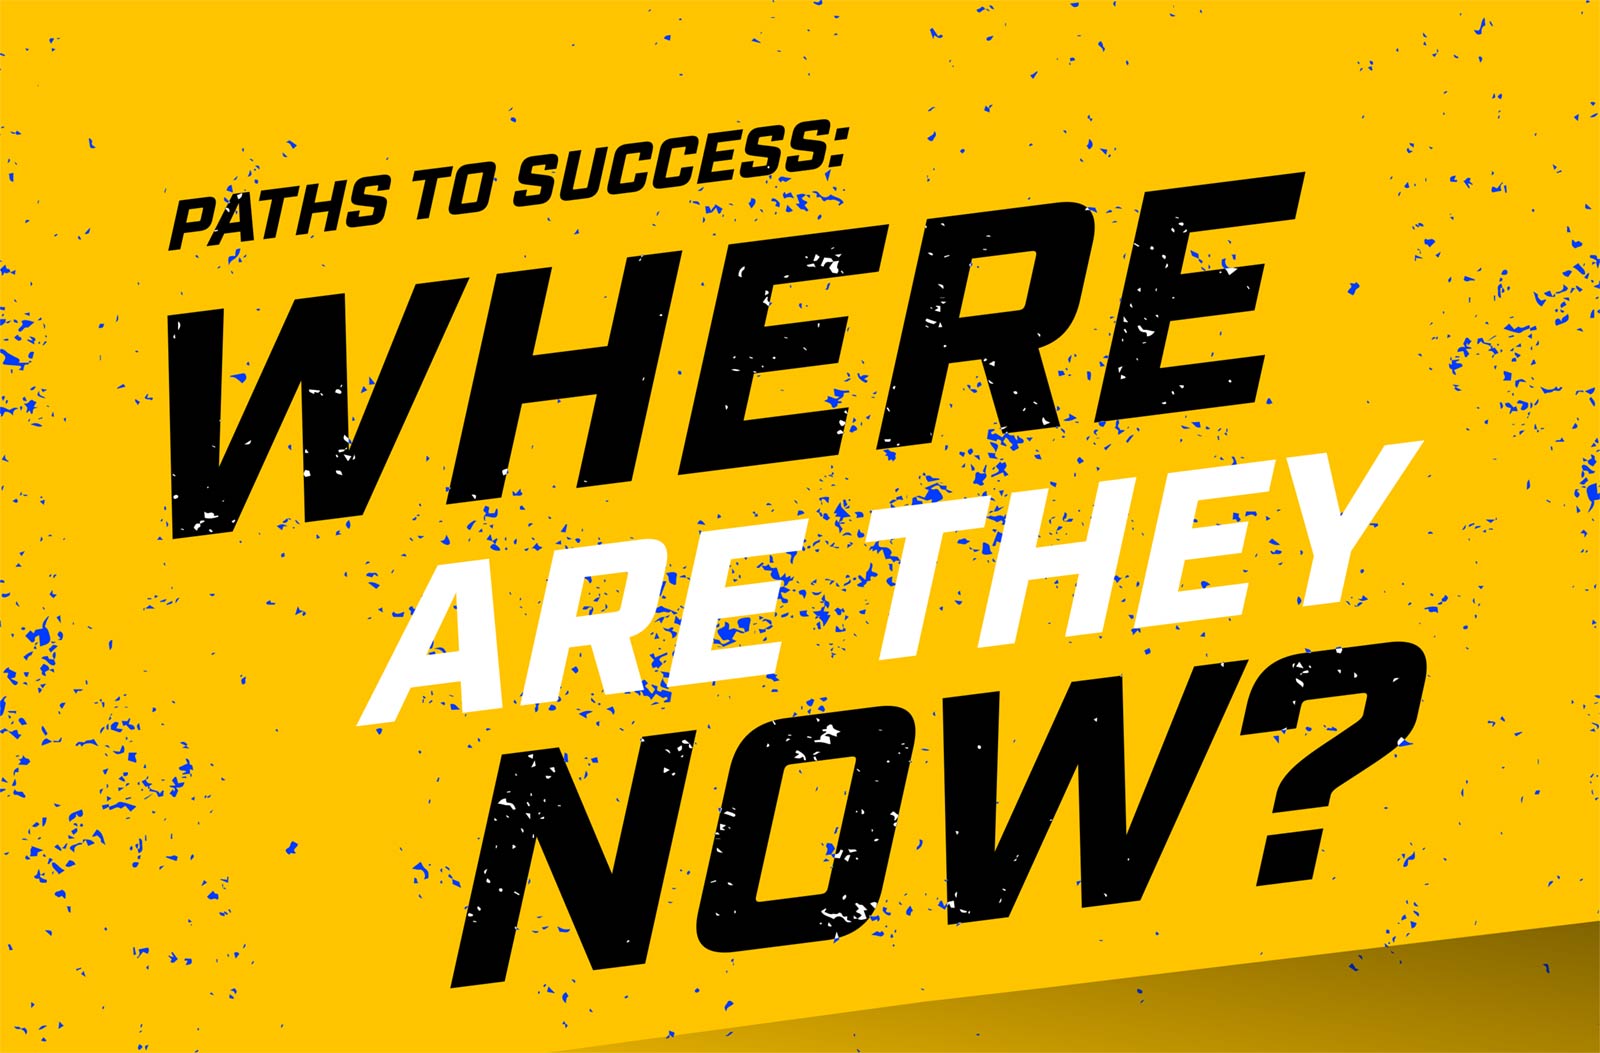 Paths to Success: Where are they now?